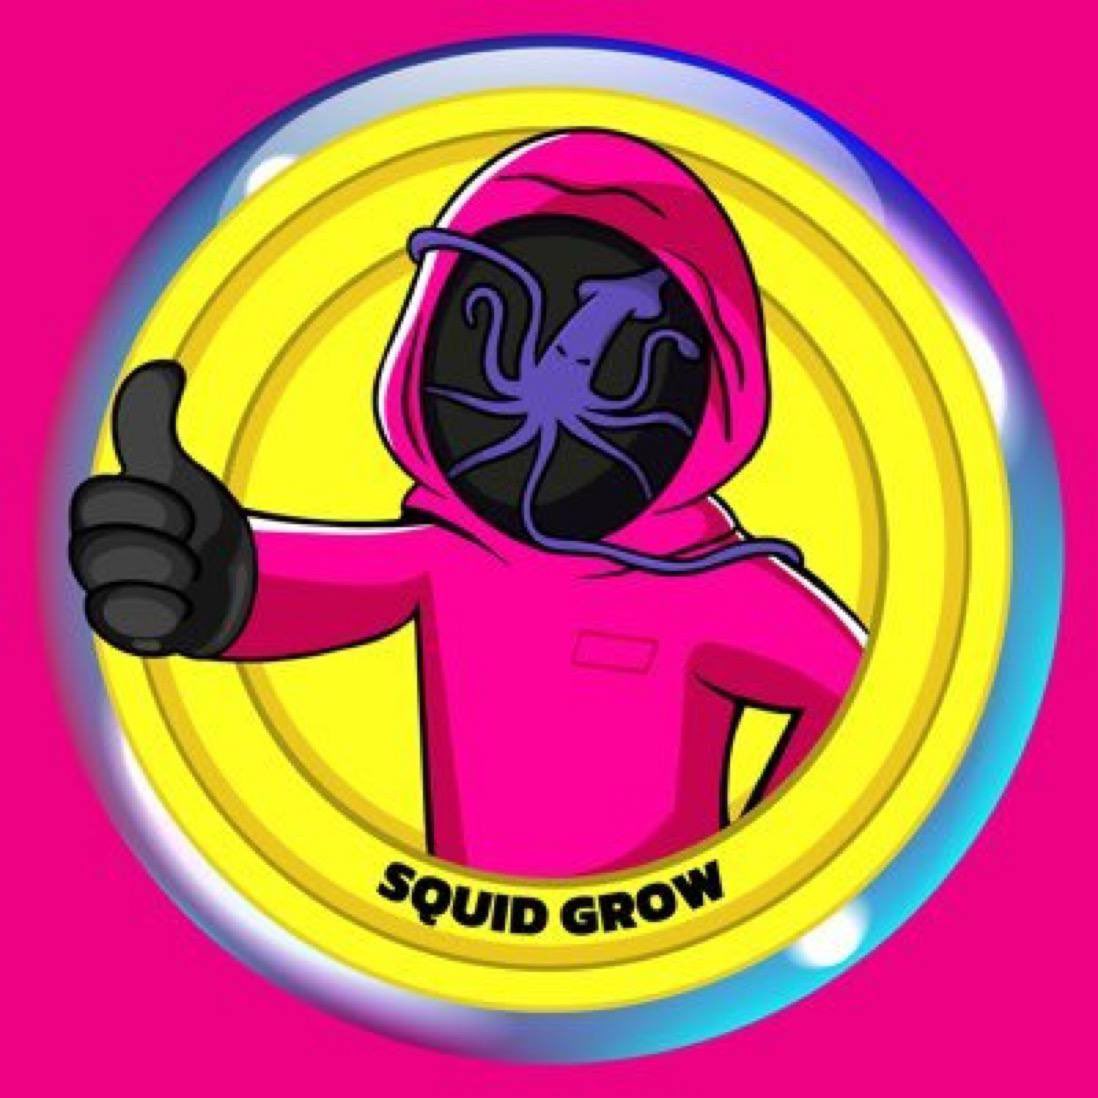 #SquidGrow is destined for the billions!